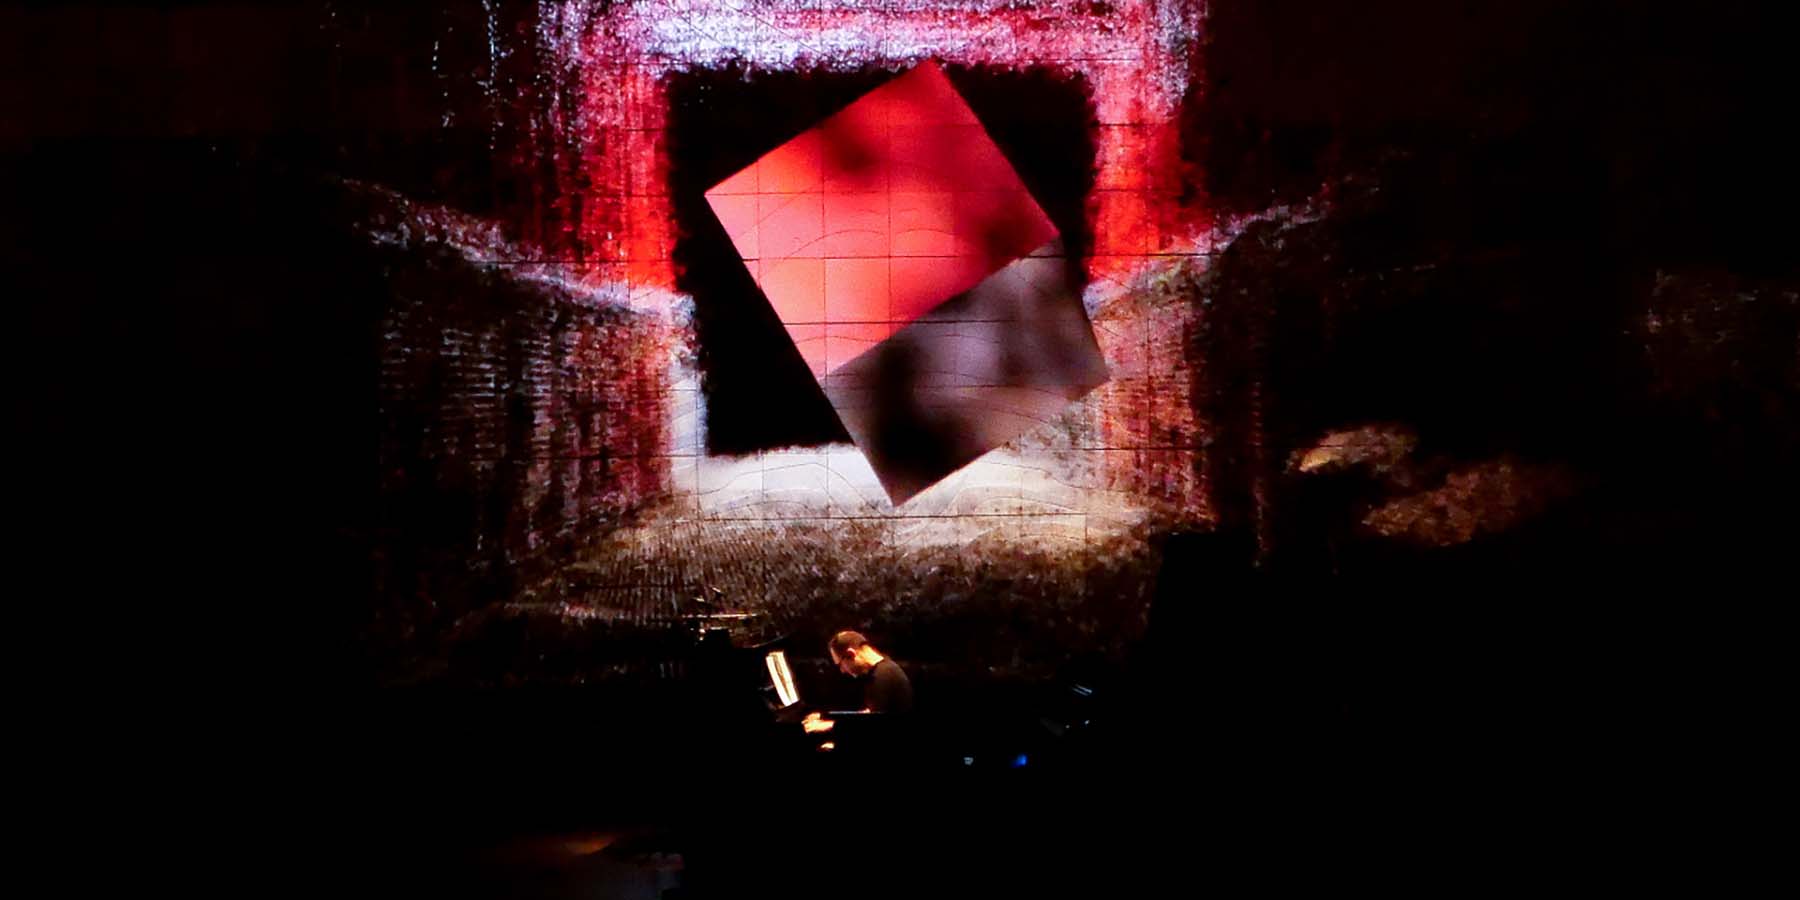 Luke Howard performing within an immersive digital experience at Melbourne Recital Centre.